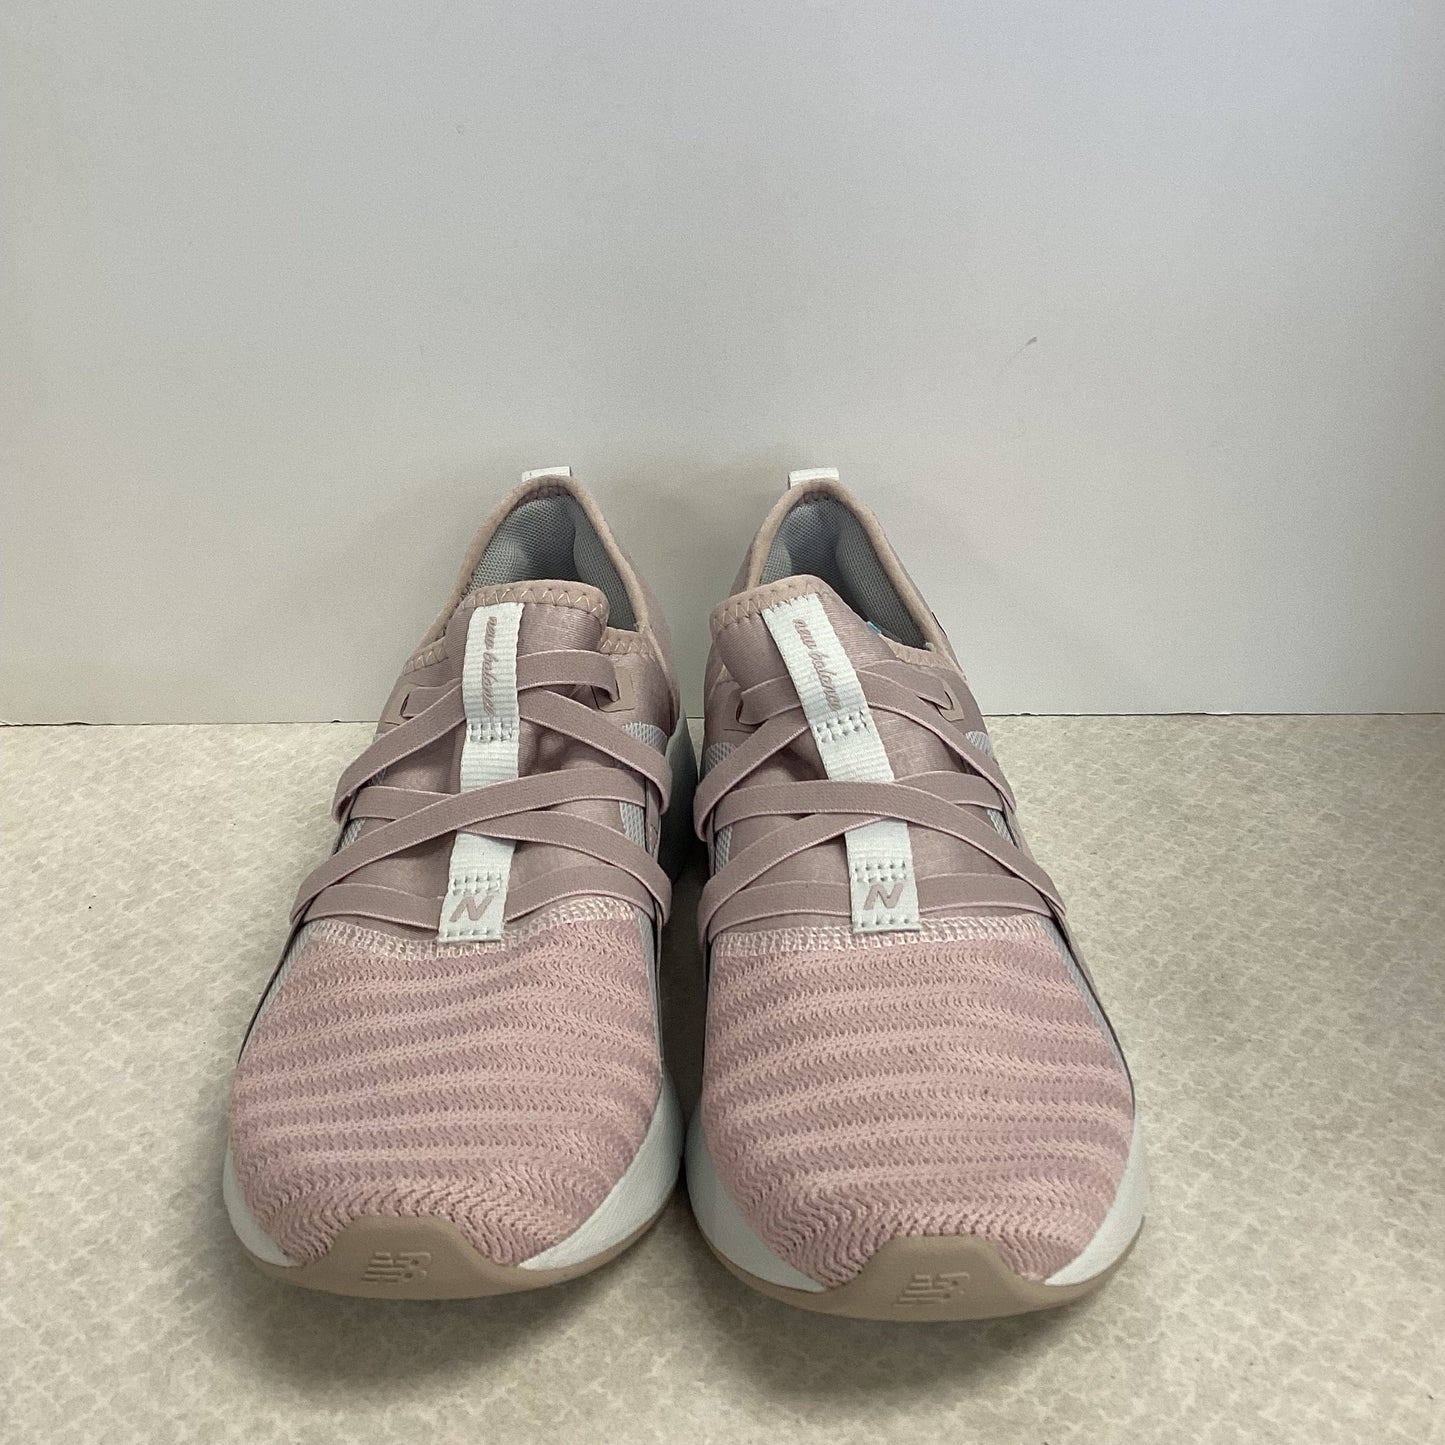 Pink Shoes Athletic New Balance, Size 9.5